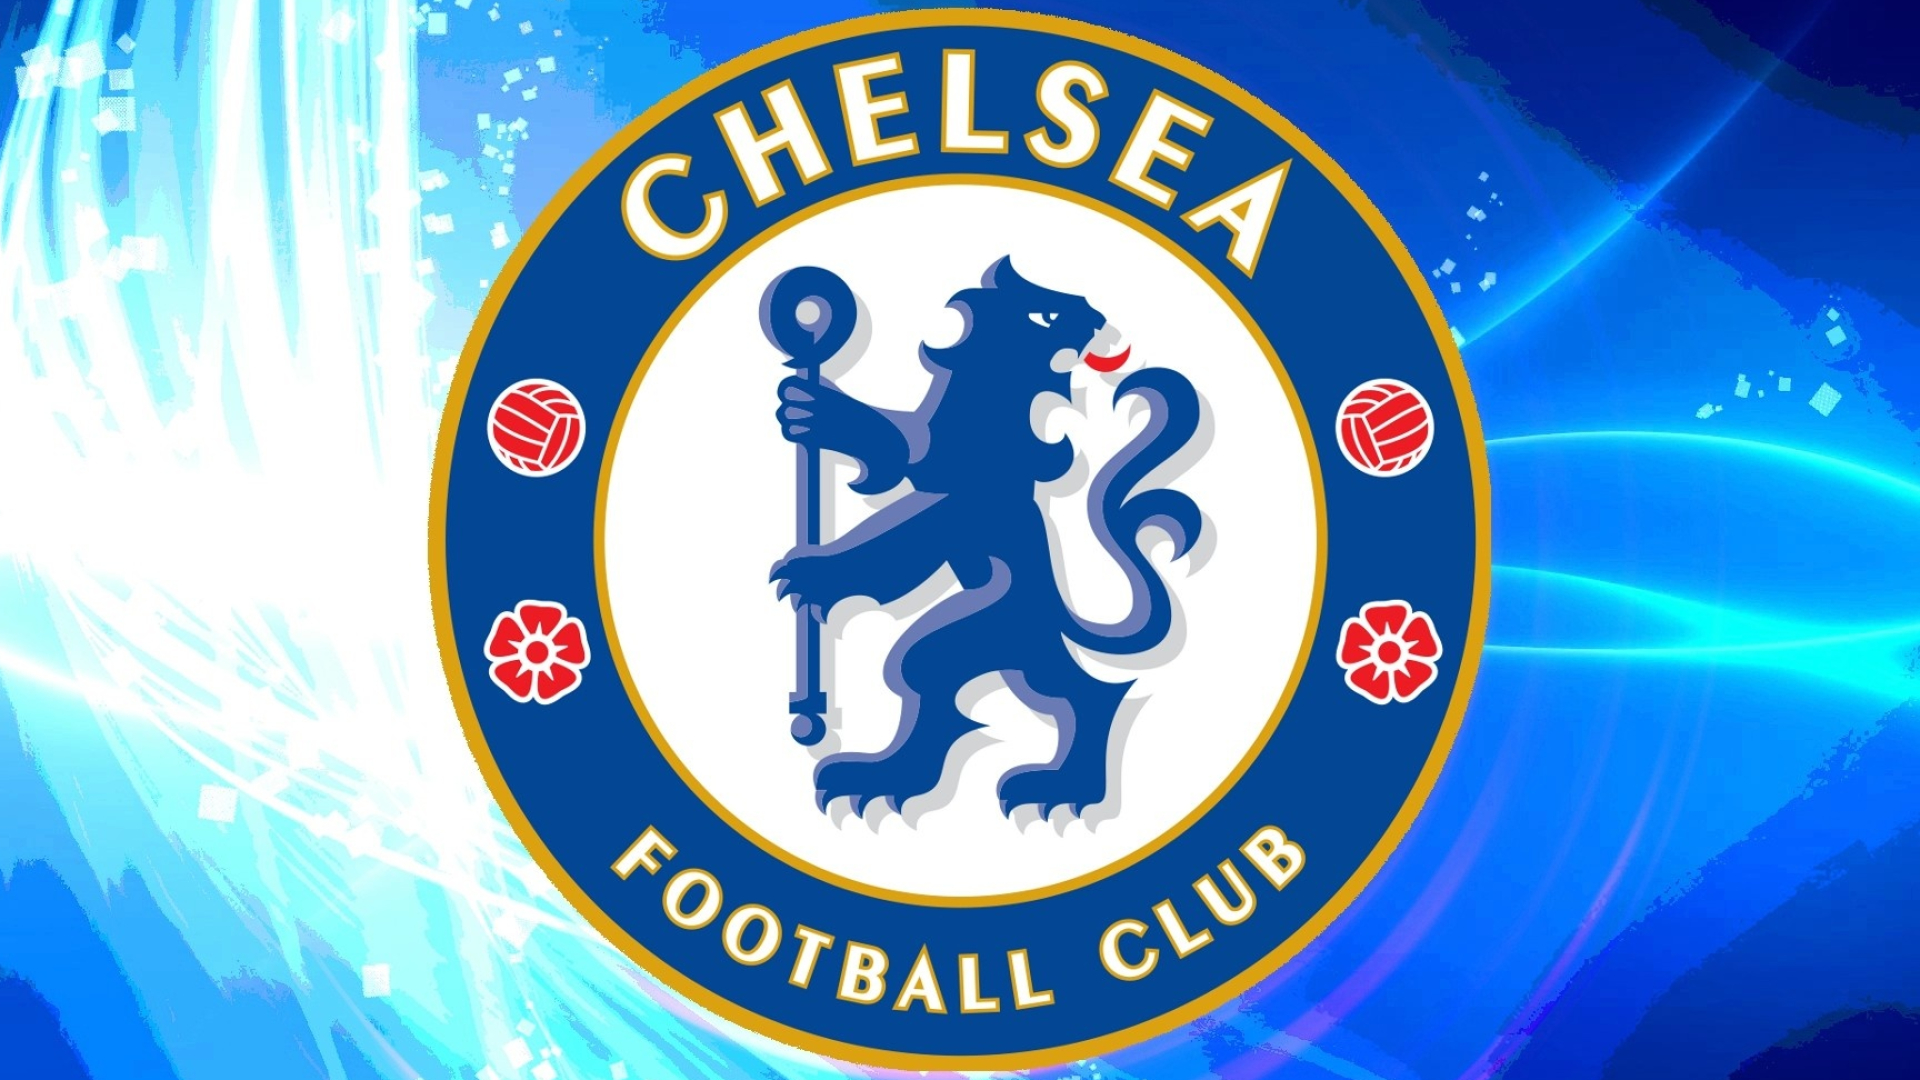 Chelsea: The eighth highest-earning football club in the world, with earnings of over €493.1 million. 1920x1080 Full HD Wallpaper.